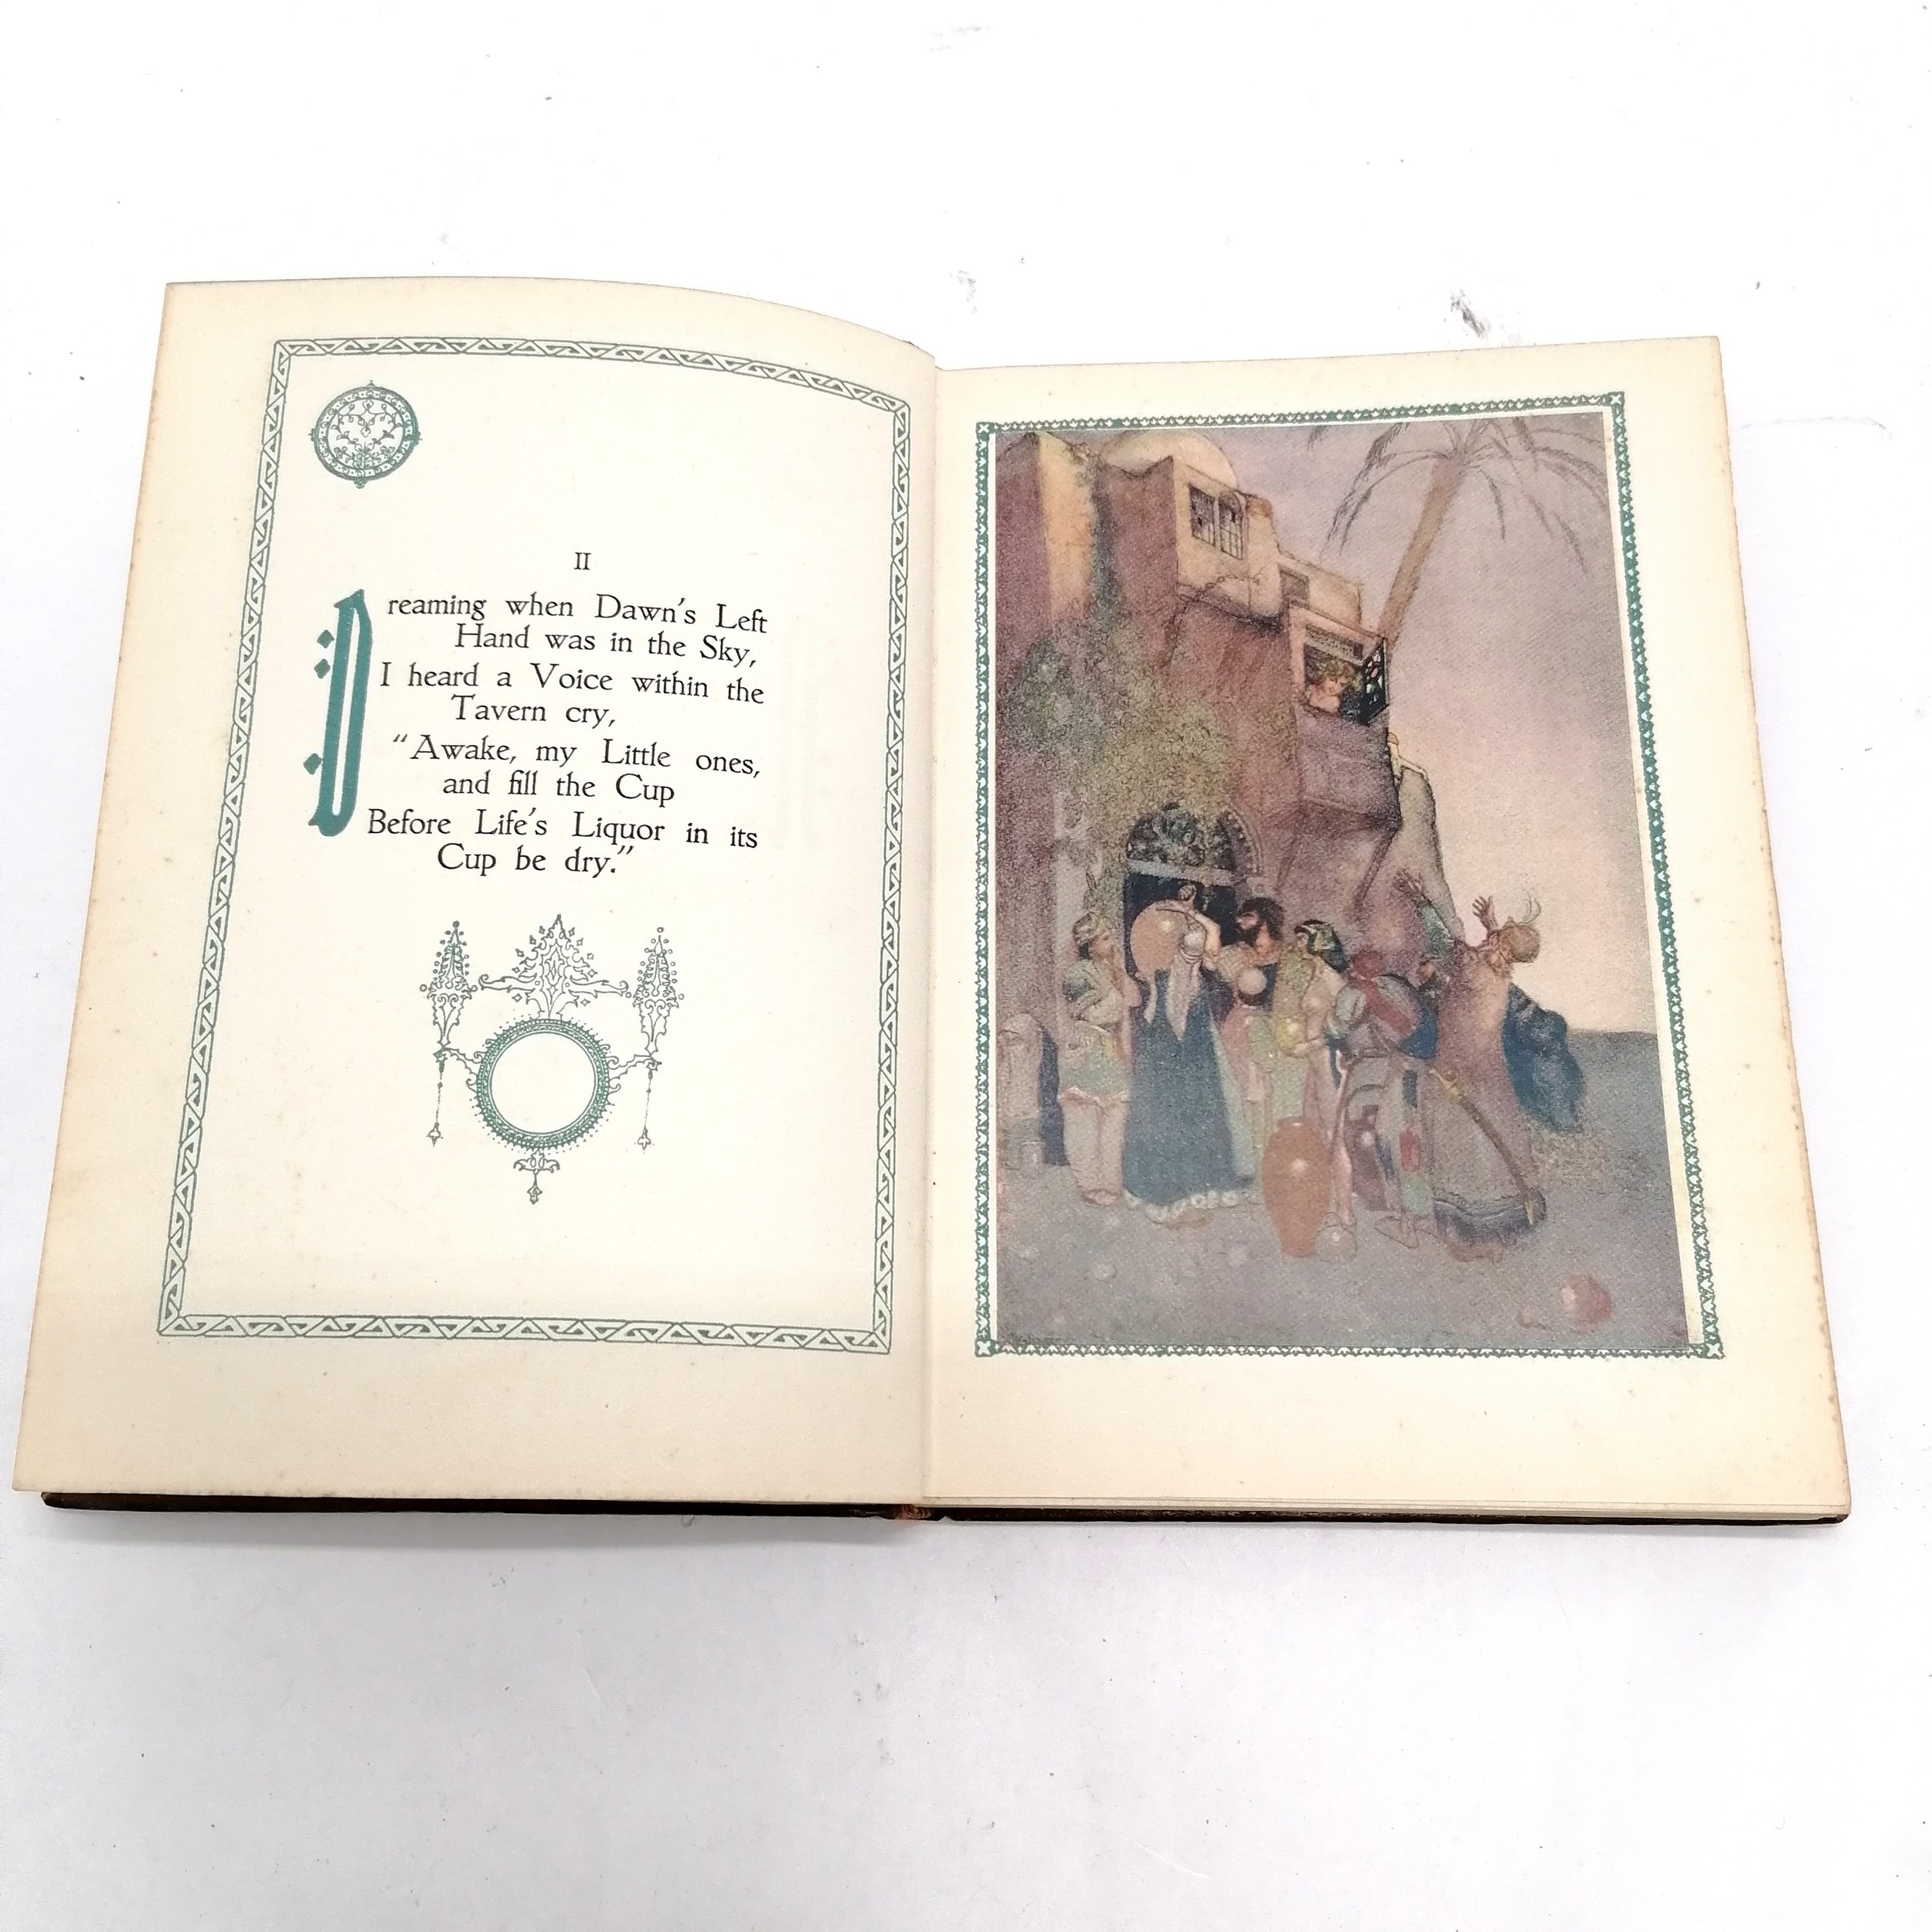 (1909+) Rubaiyat of Omar Khayyam (George Harrap) book with illustrations by William 'Willy' Andrew - Image 5 of 8